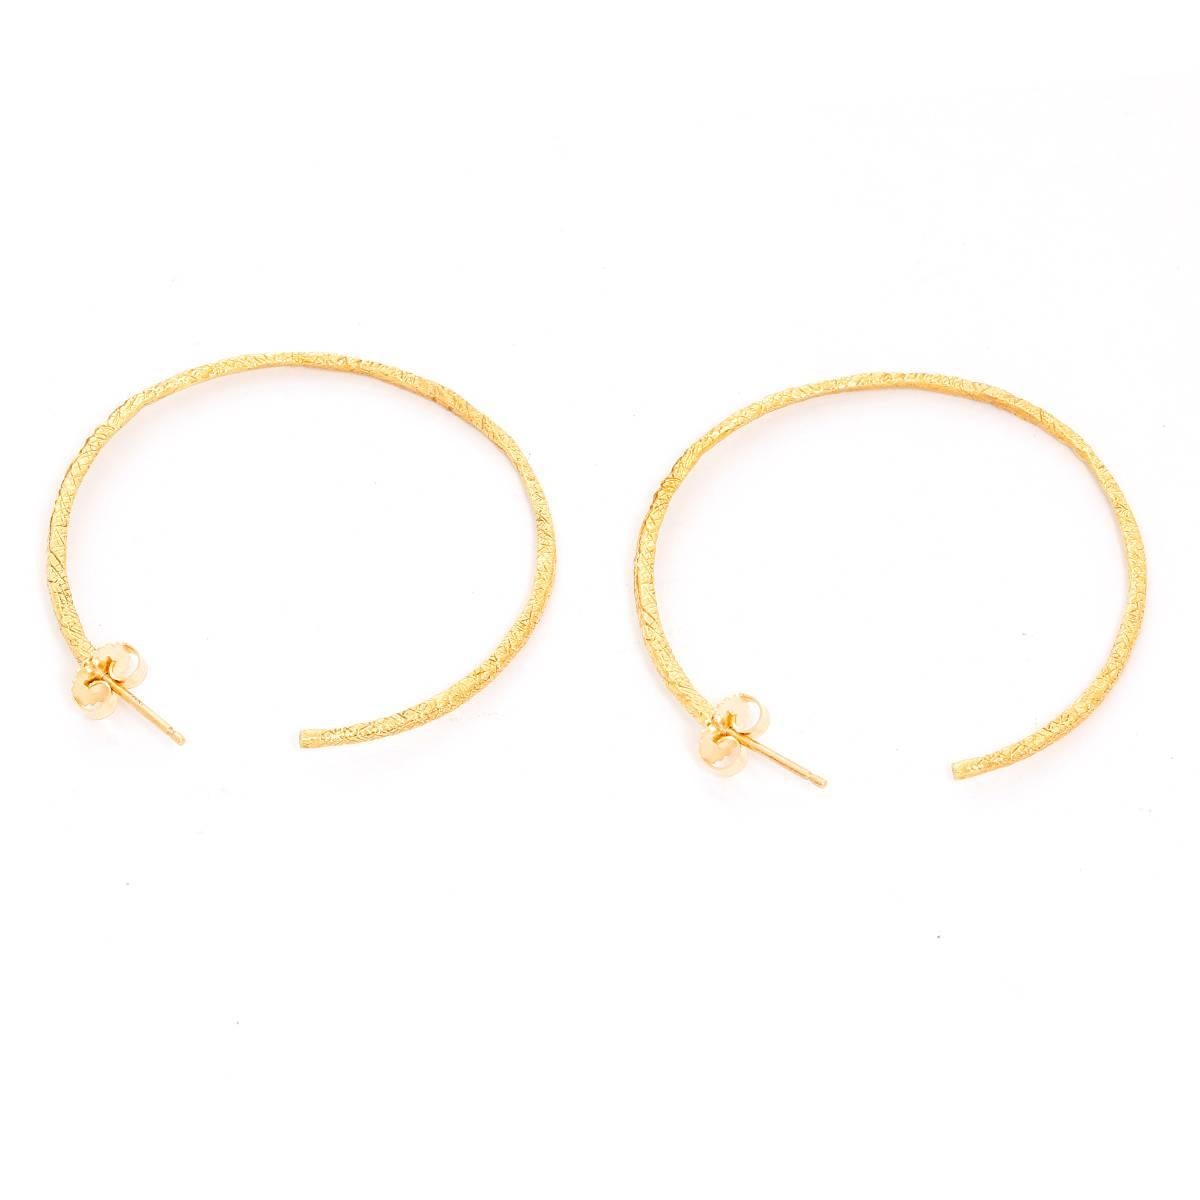 18K Yellow Gold Hammered Earring Hoops - 2 inches in diameter .2 mm in thickness. Total weight of 8.4 grams. Perfect for an every day look.